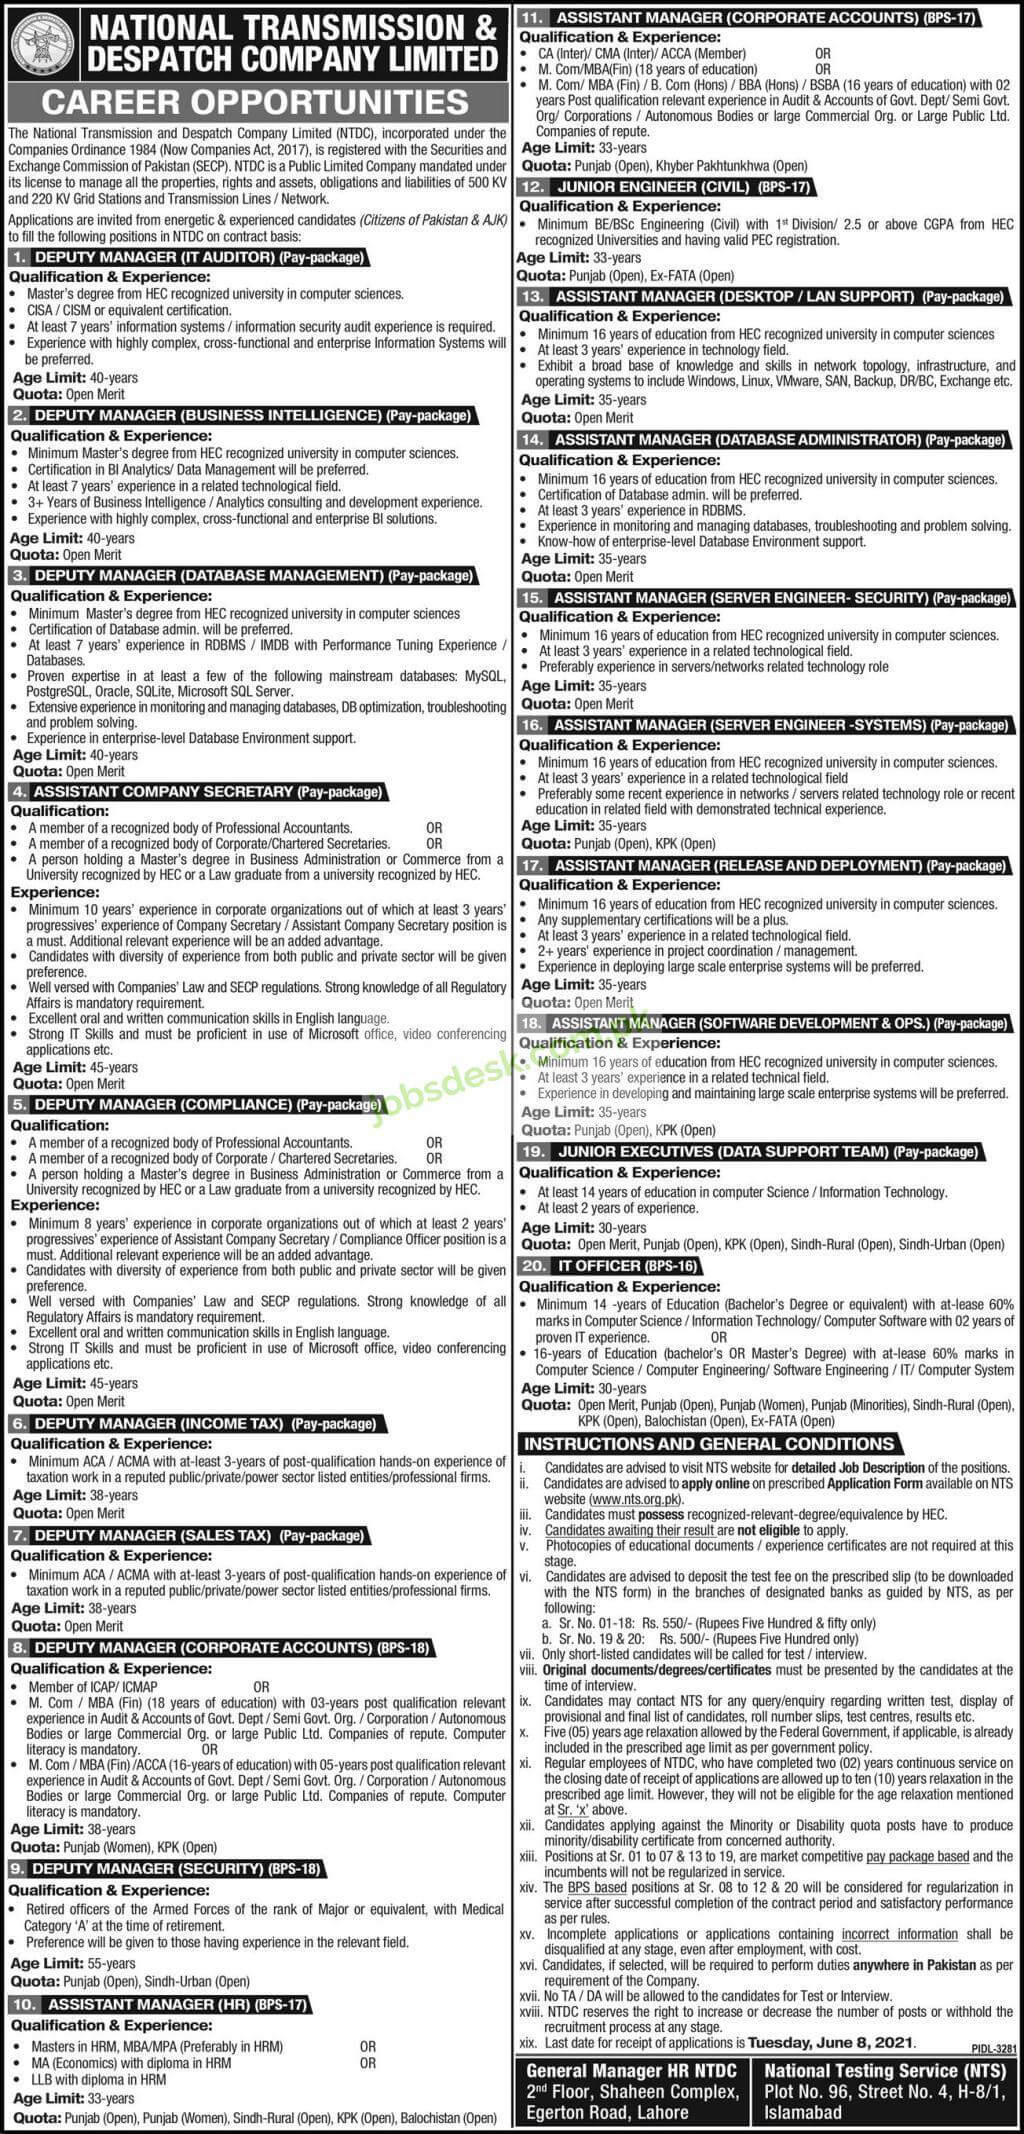 National Transmission & Despatch Company Jobs May 2021